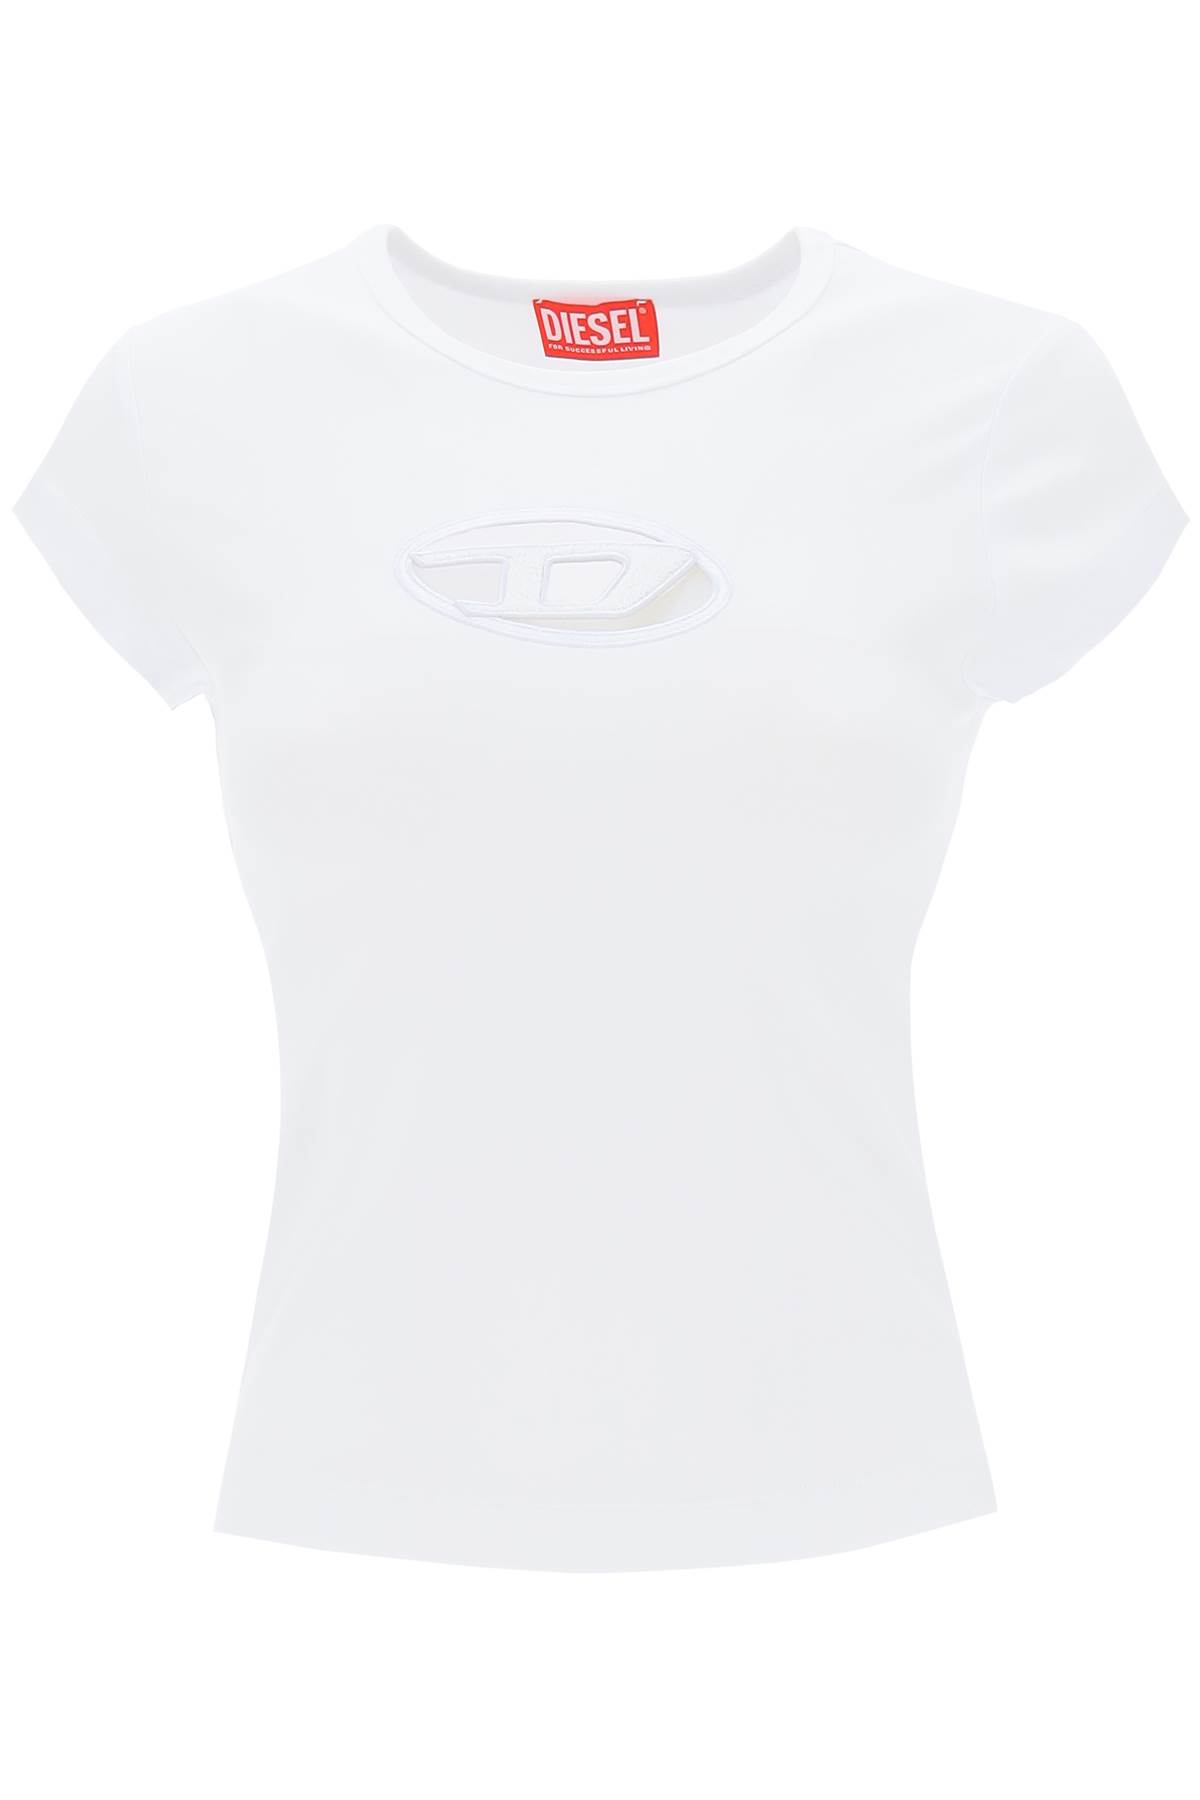 Diesel Angie T-shirt With Peekaboo Logo In White